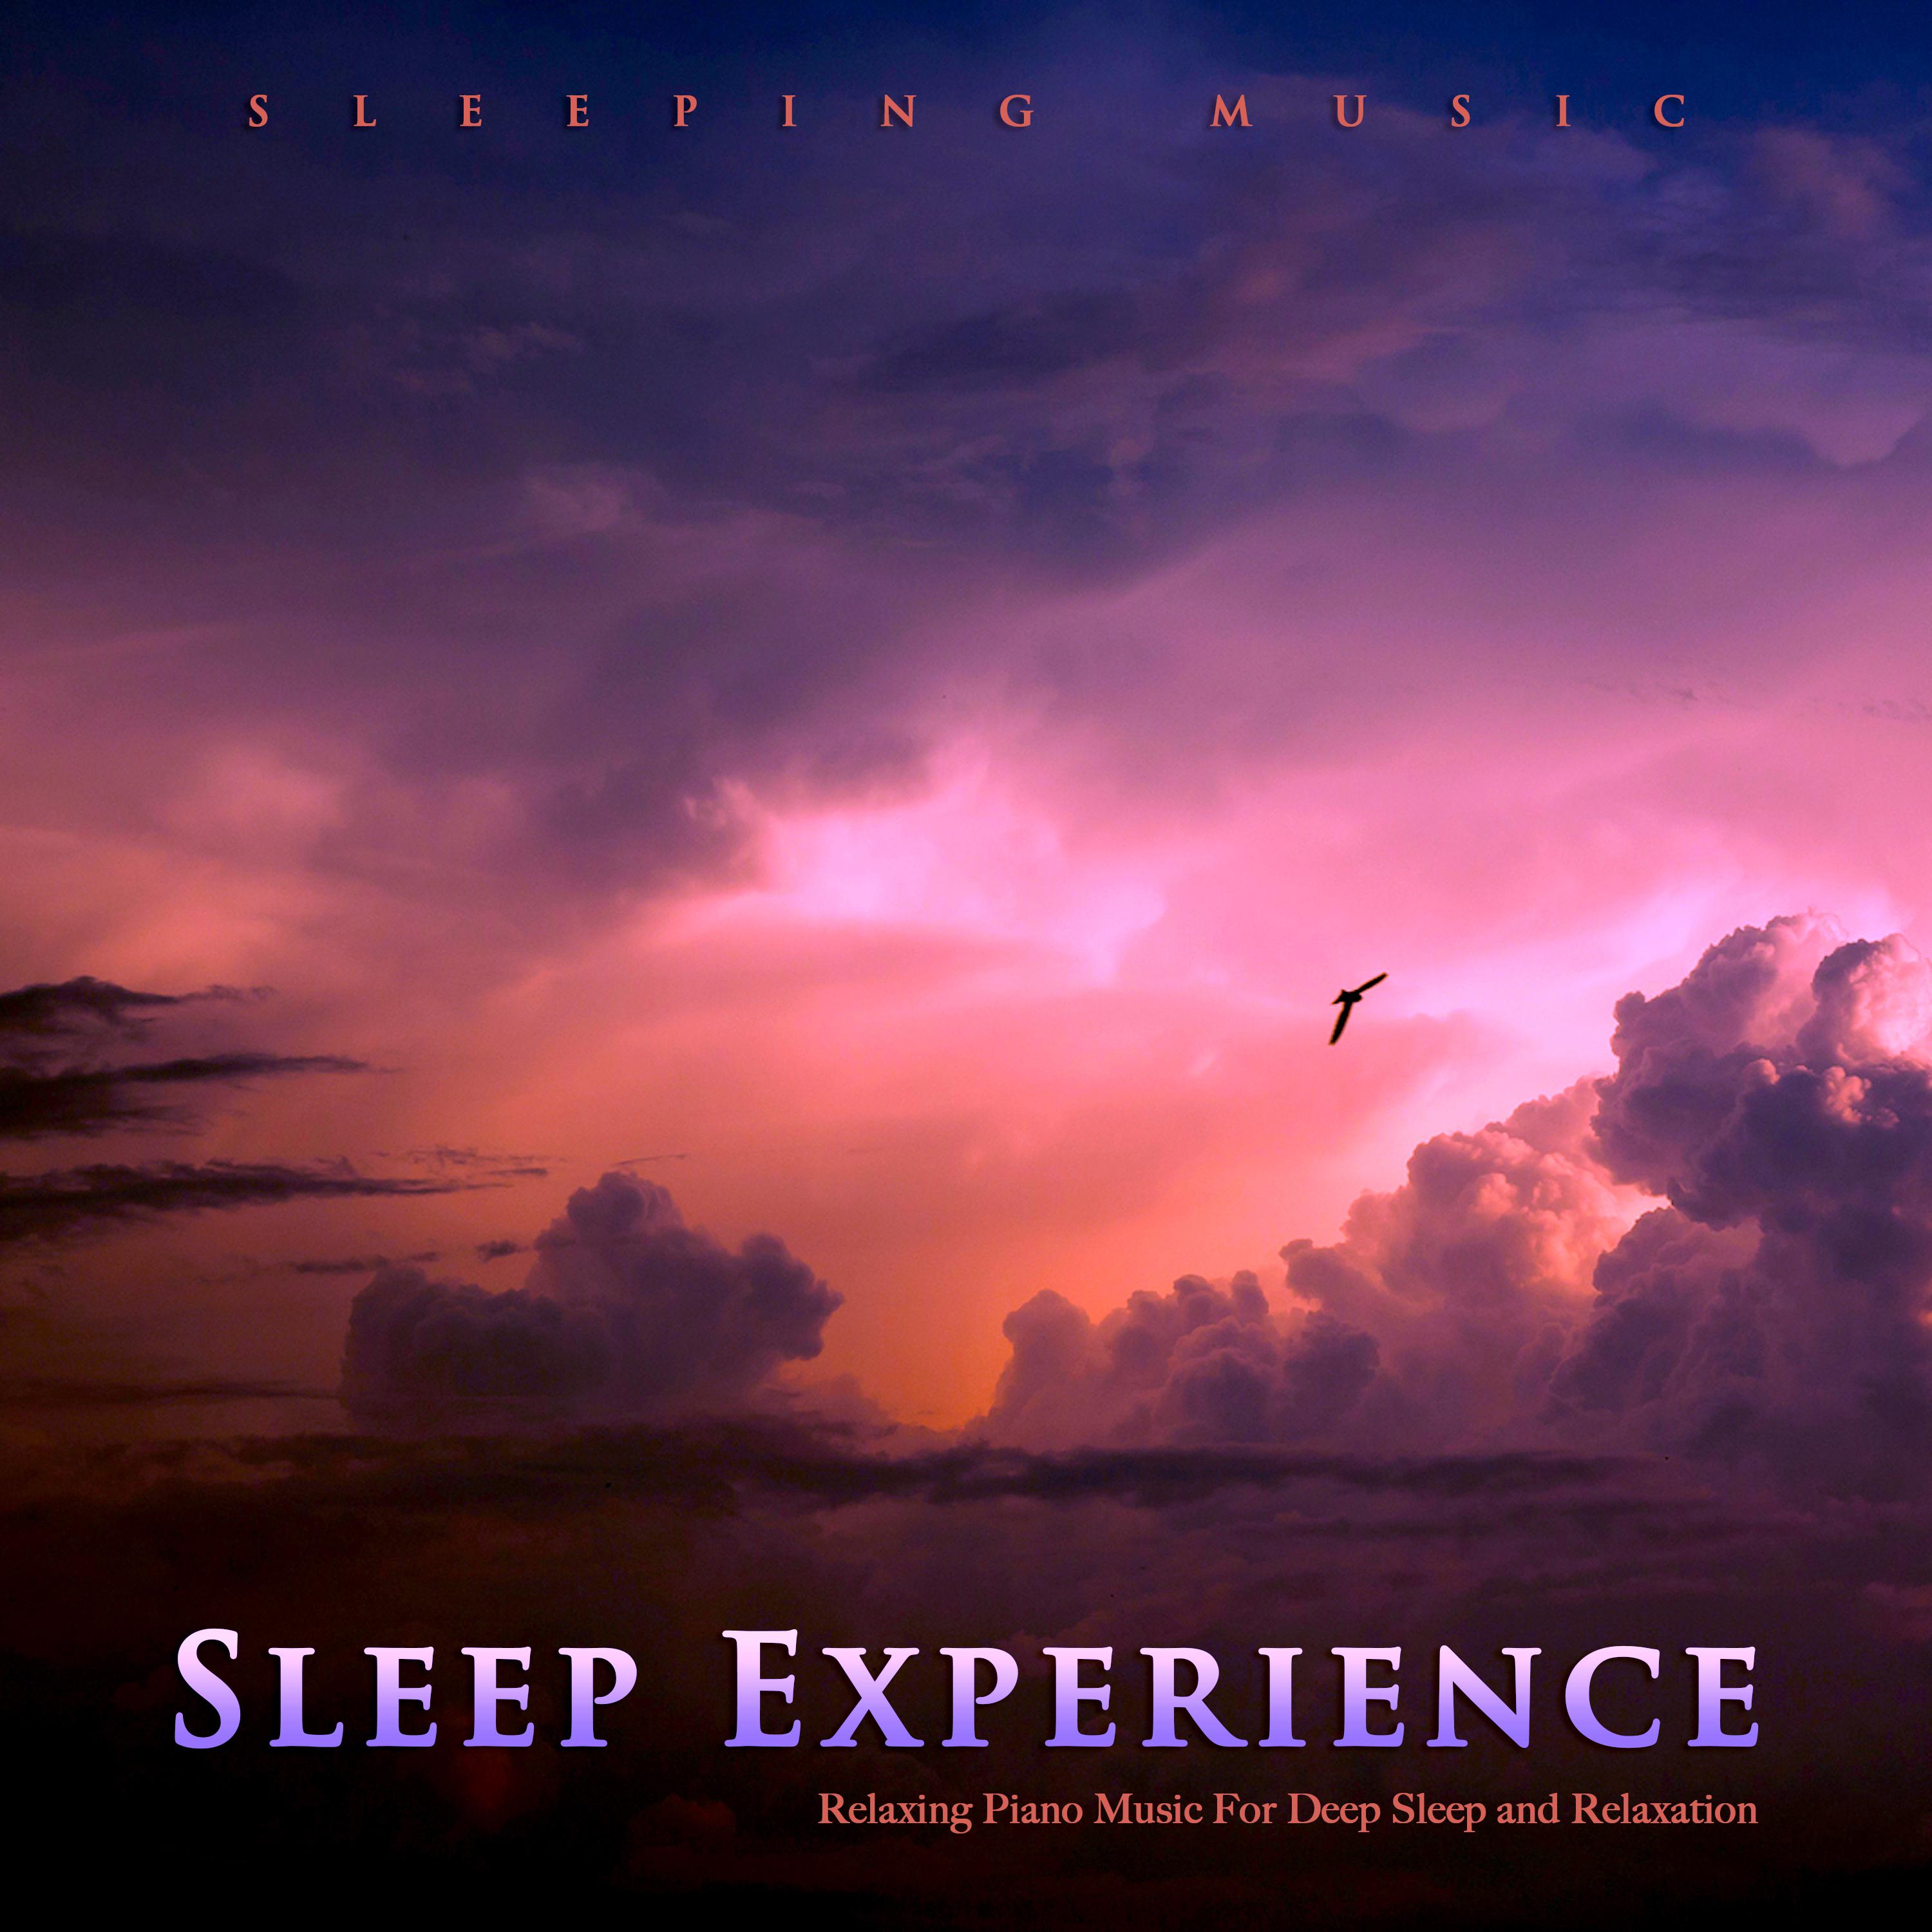 Sleep Experience: Relaxing Piano Music For Deep Sleep and Relaxation